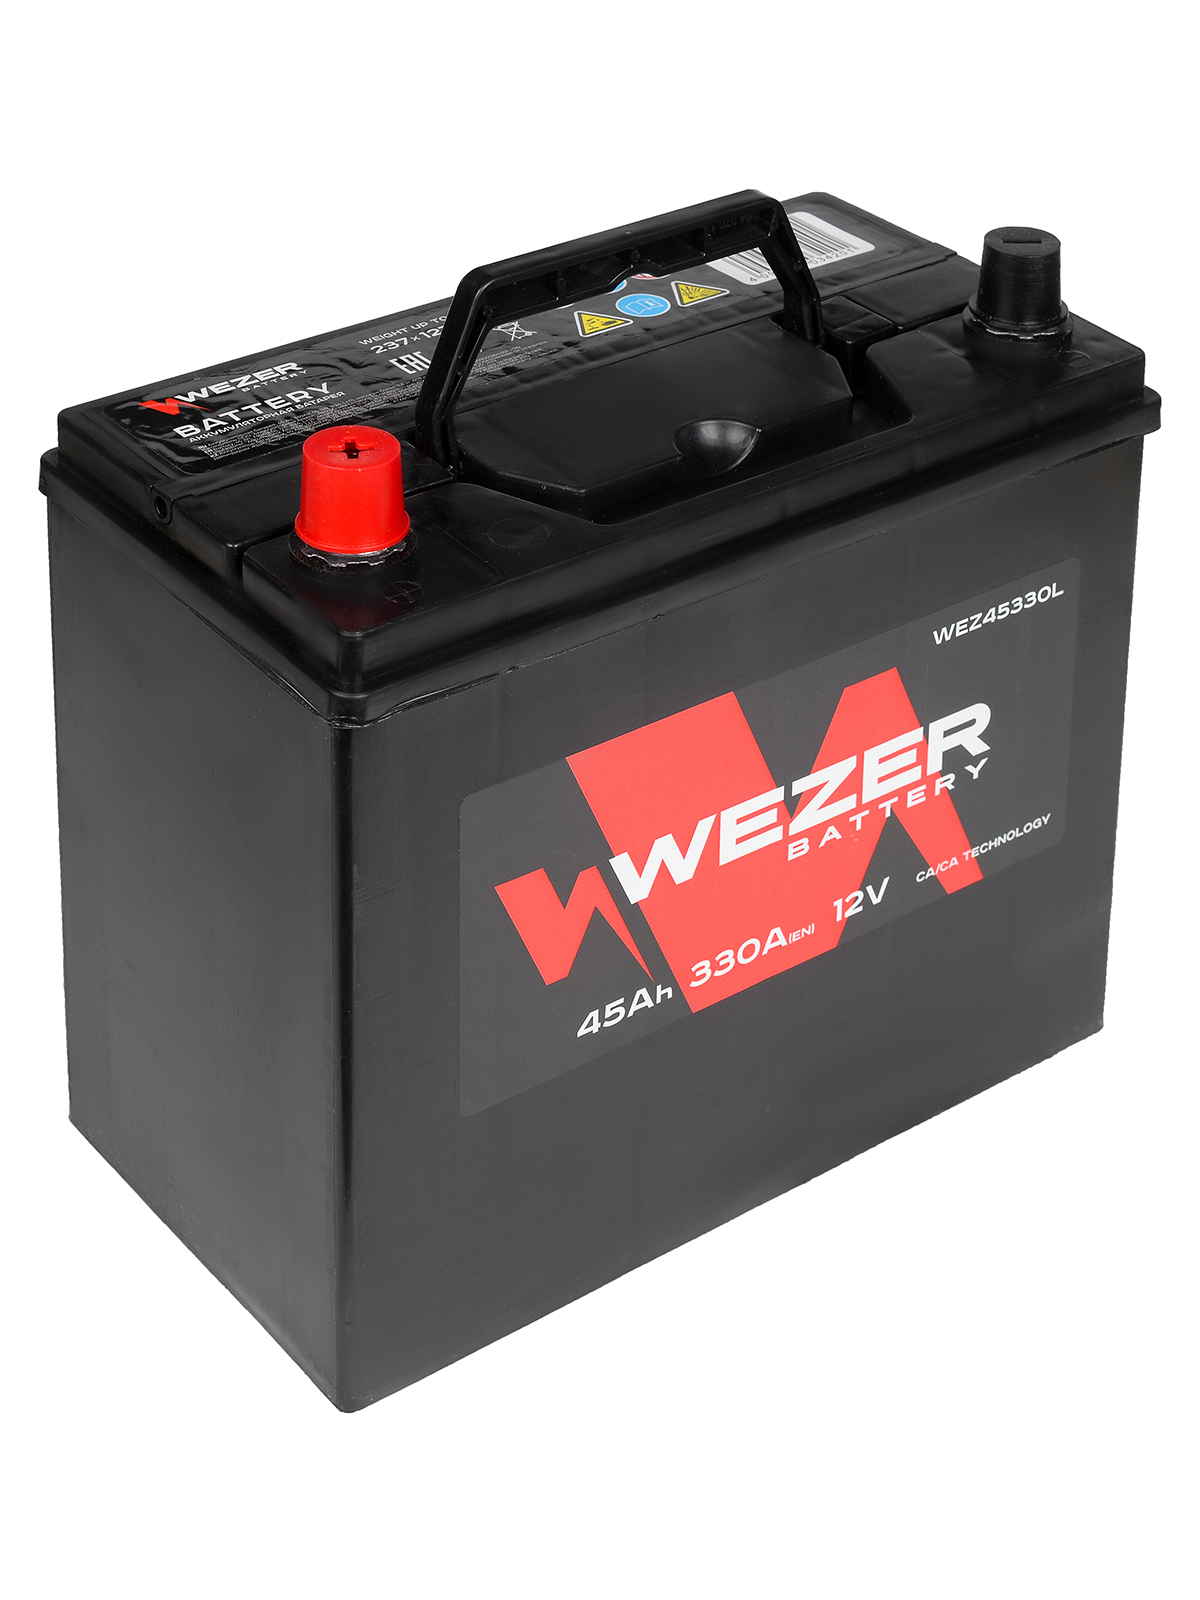 Car batteries WEZER 45Ah 330A + on the left in Europe